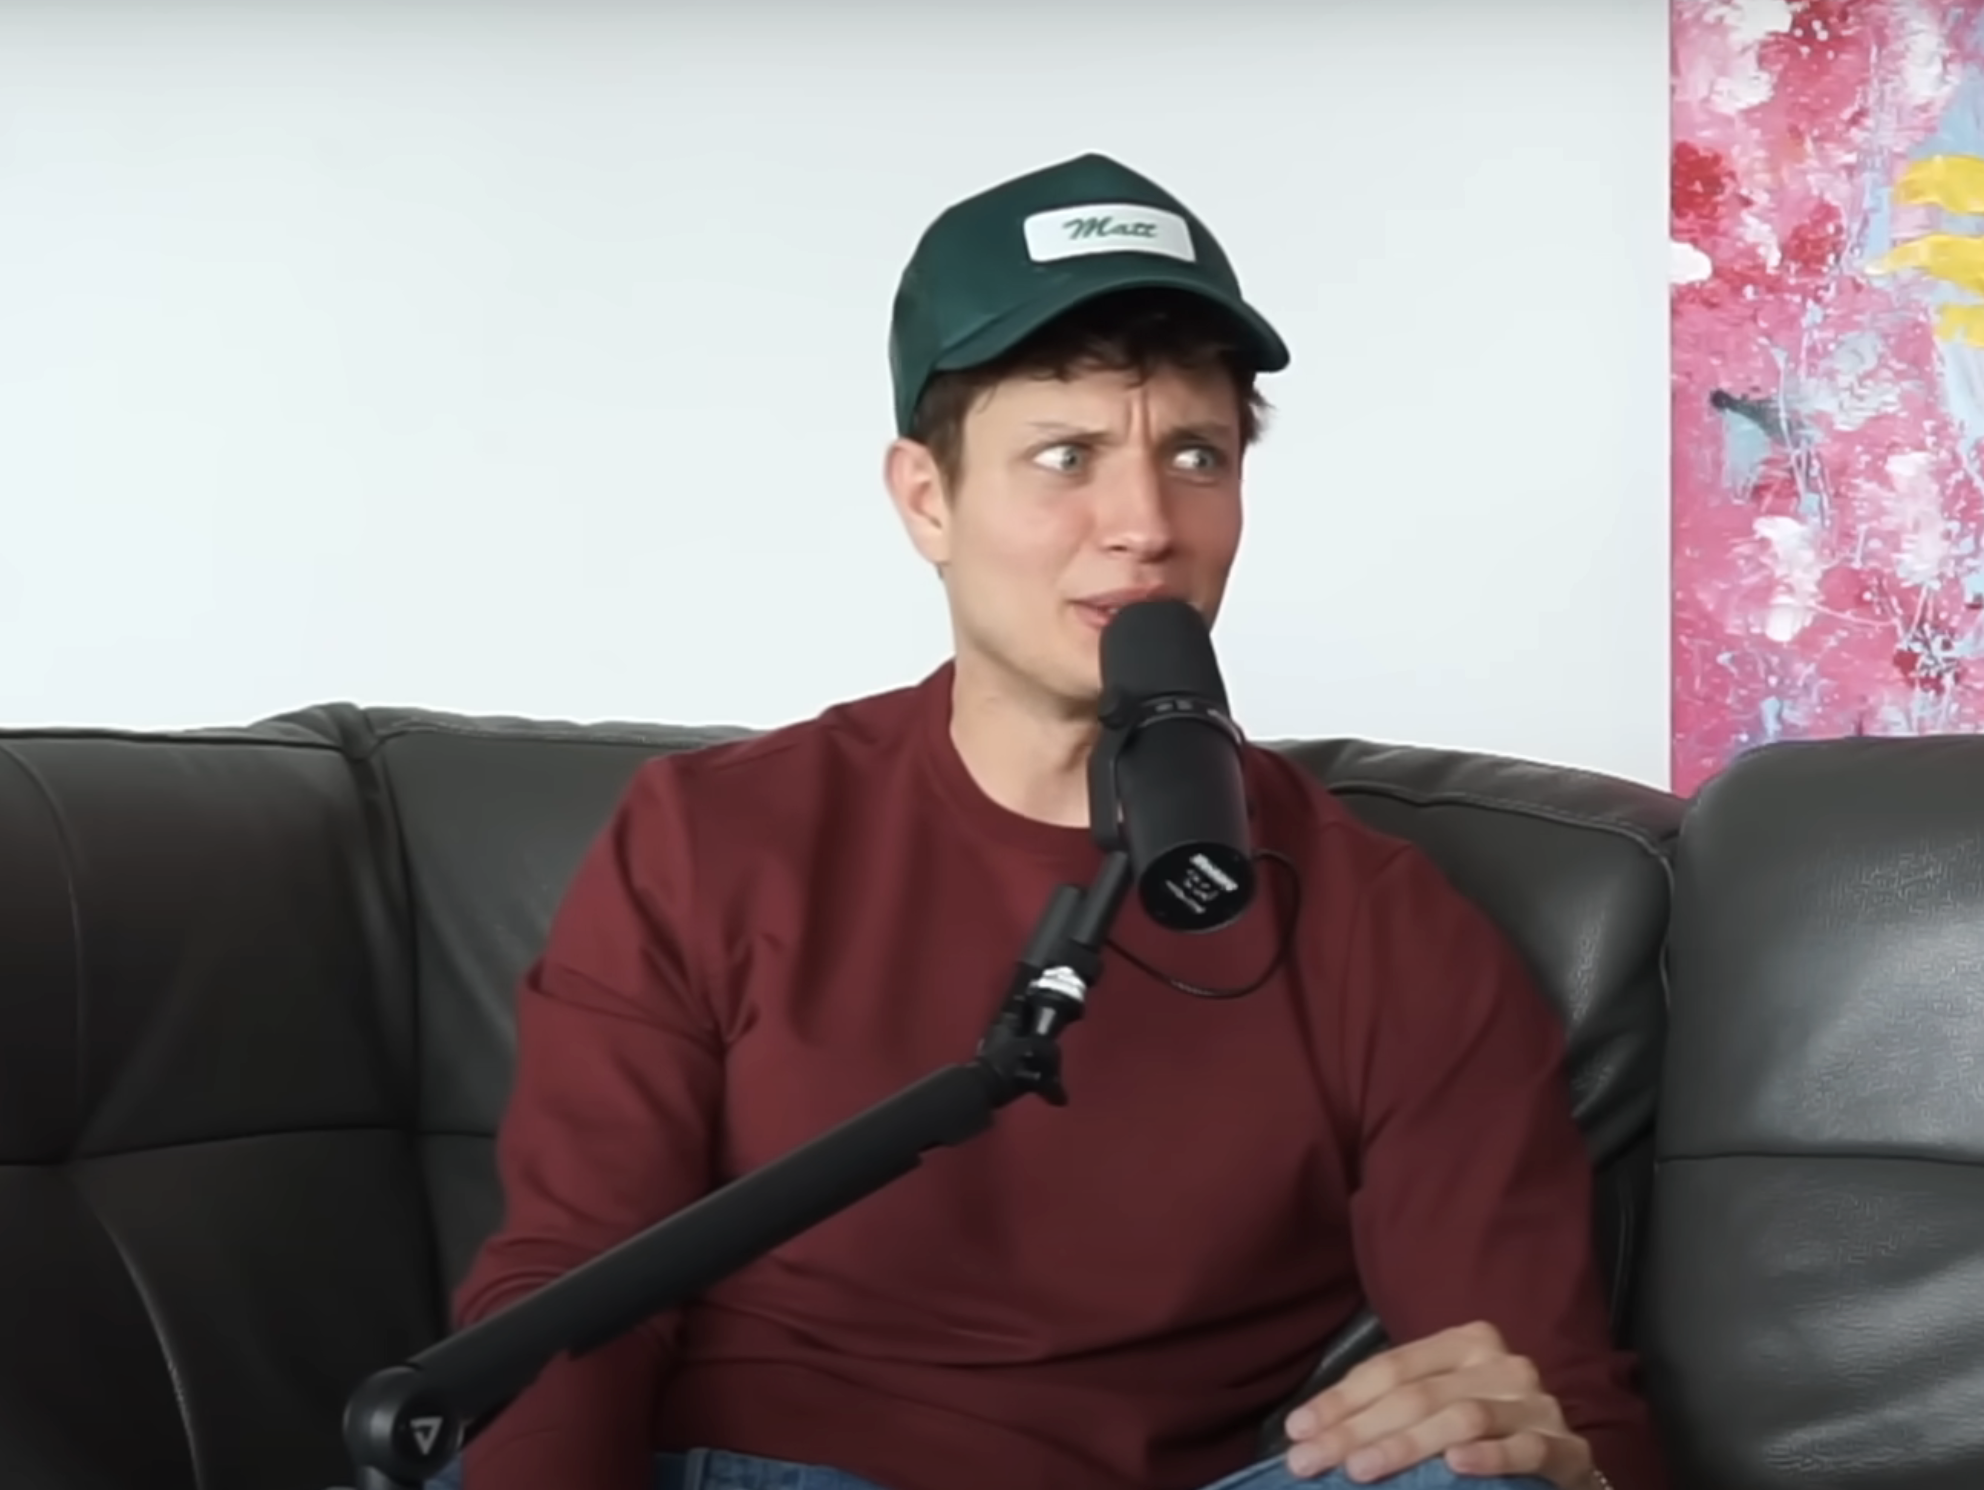 Matt in cap and shirt speaking into a microphone while seated on a couch